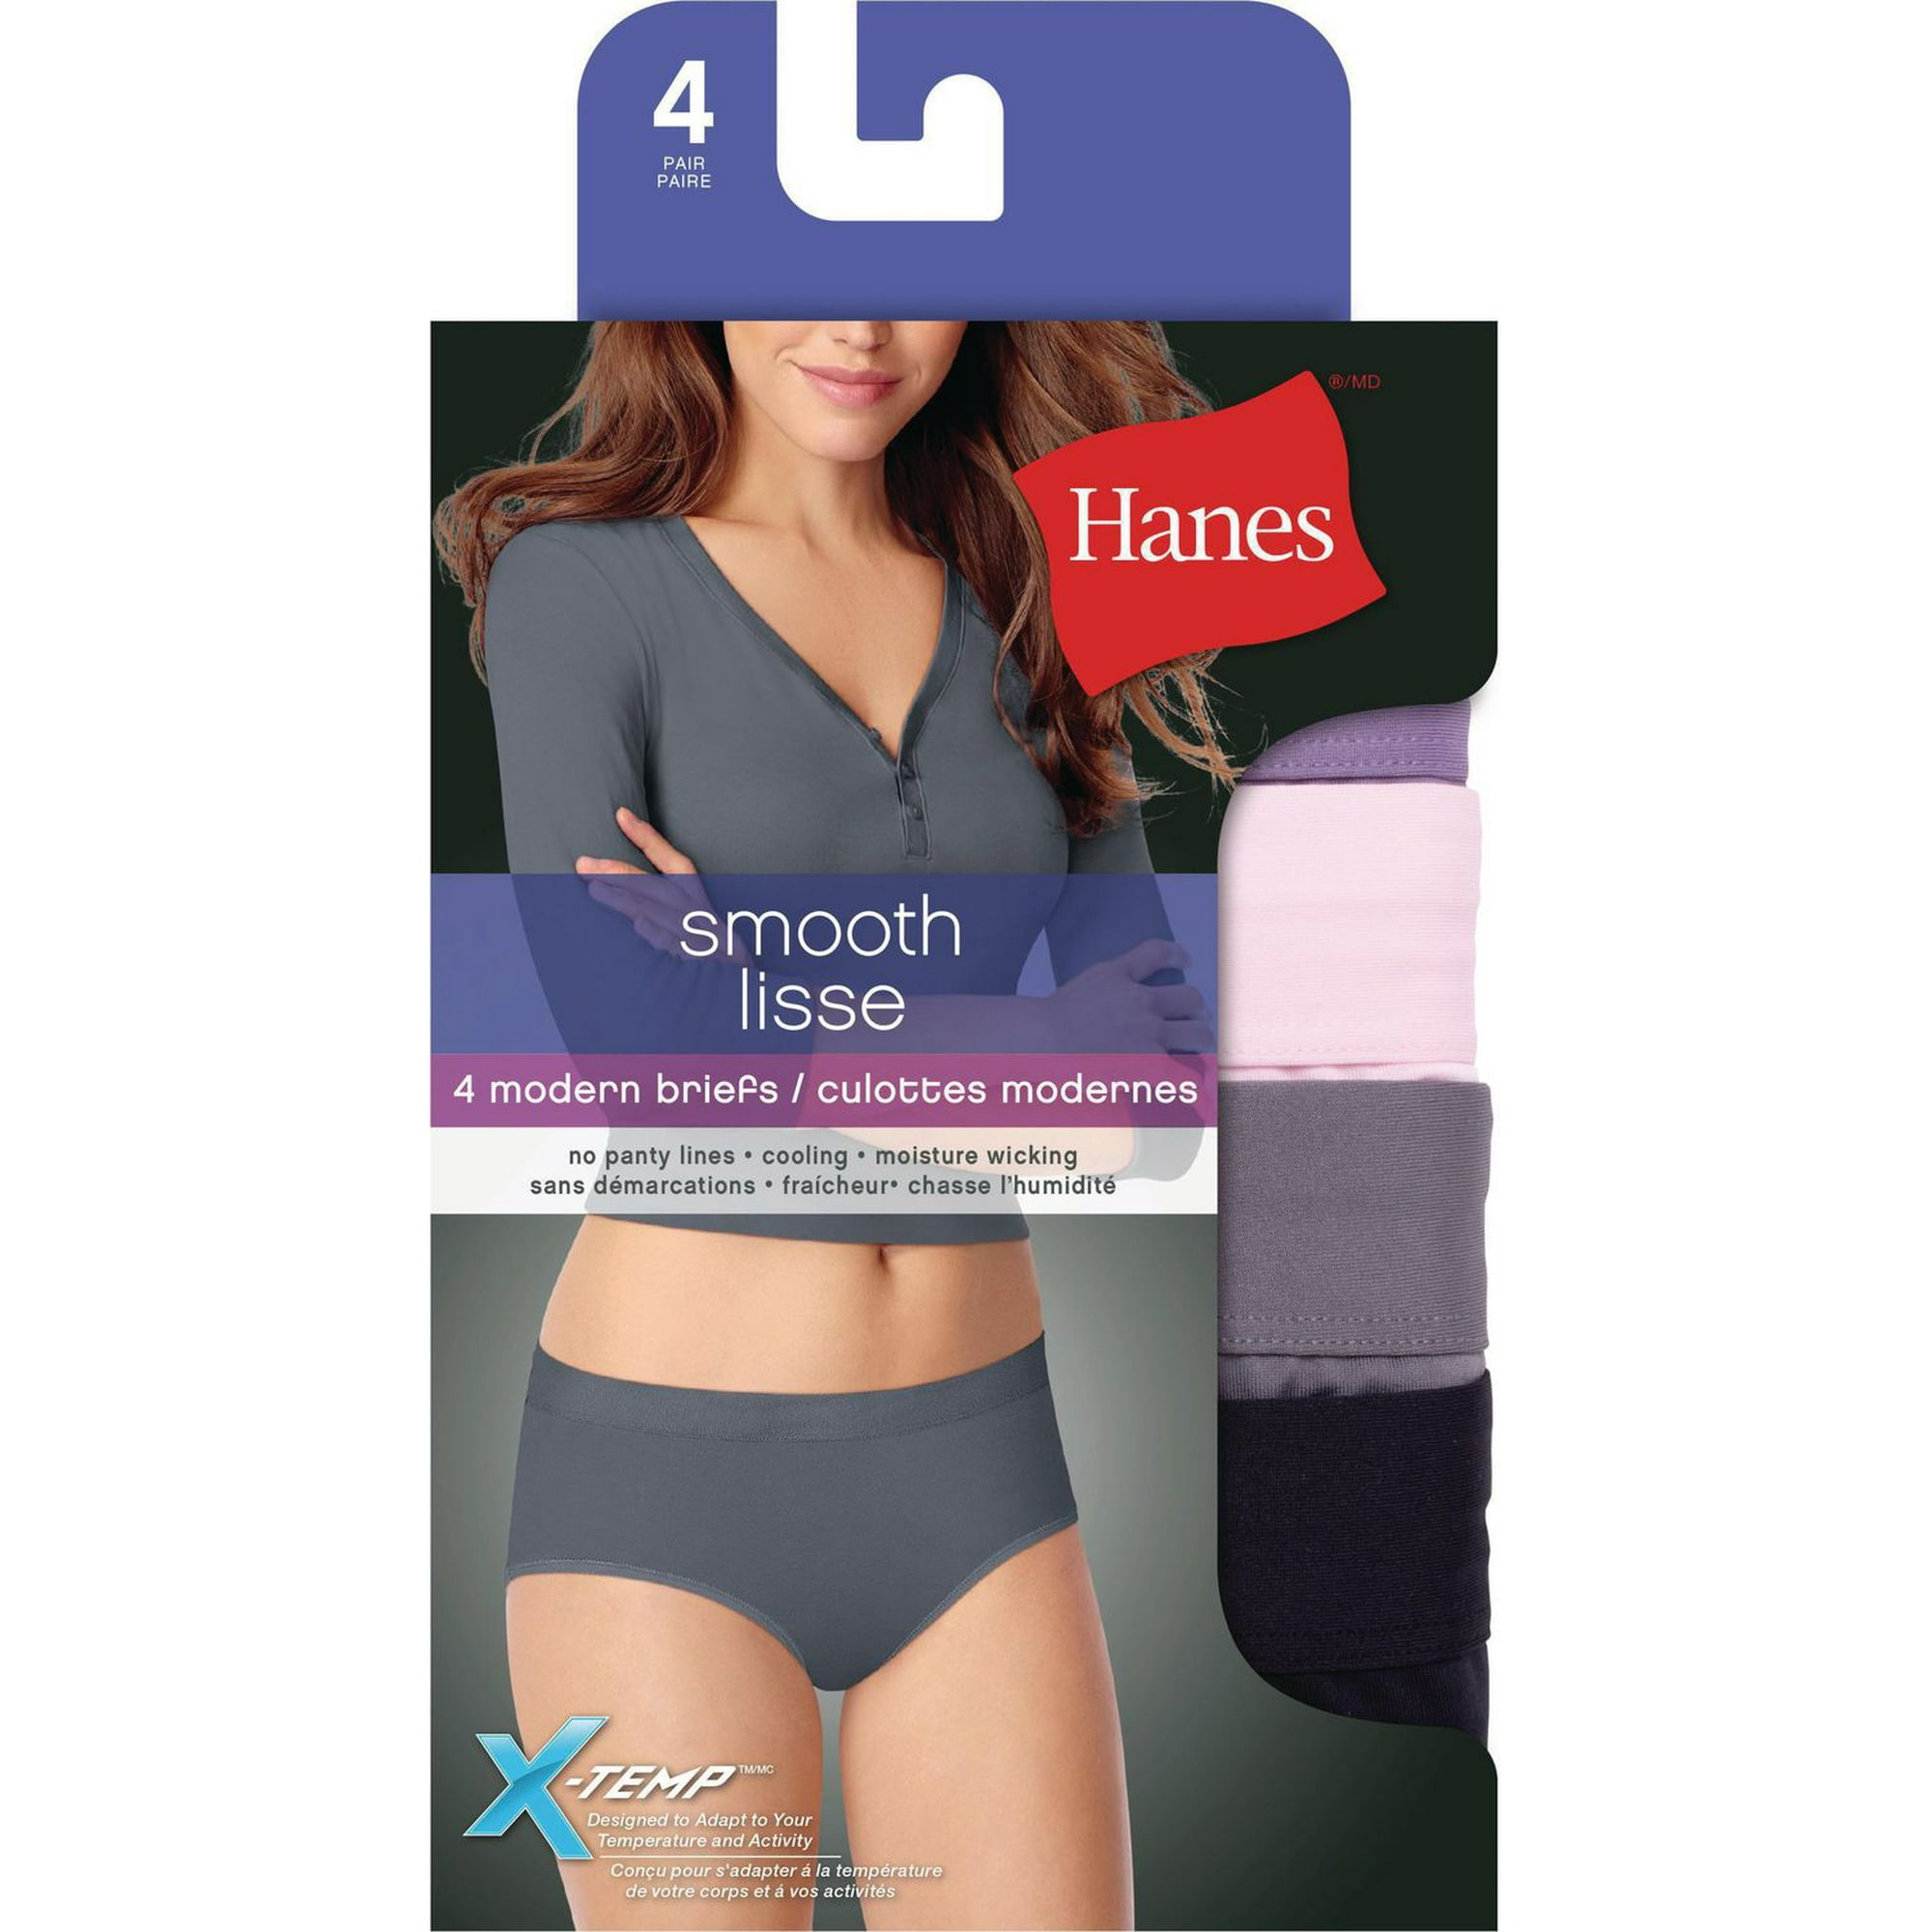 Hanes Women's 4 Pack Smooth Microfiber Brief, Sizes: S-2XL 